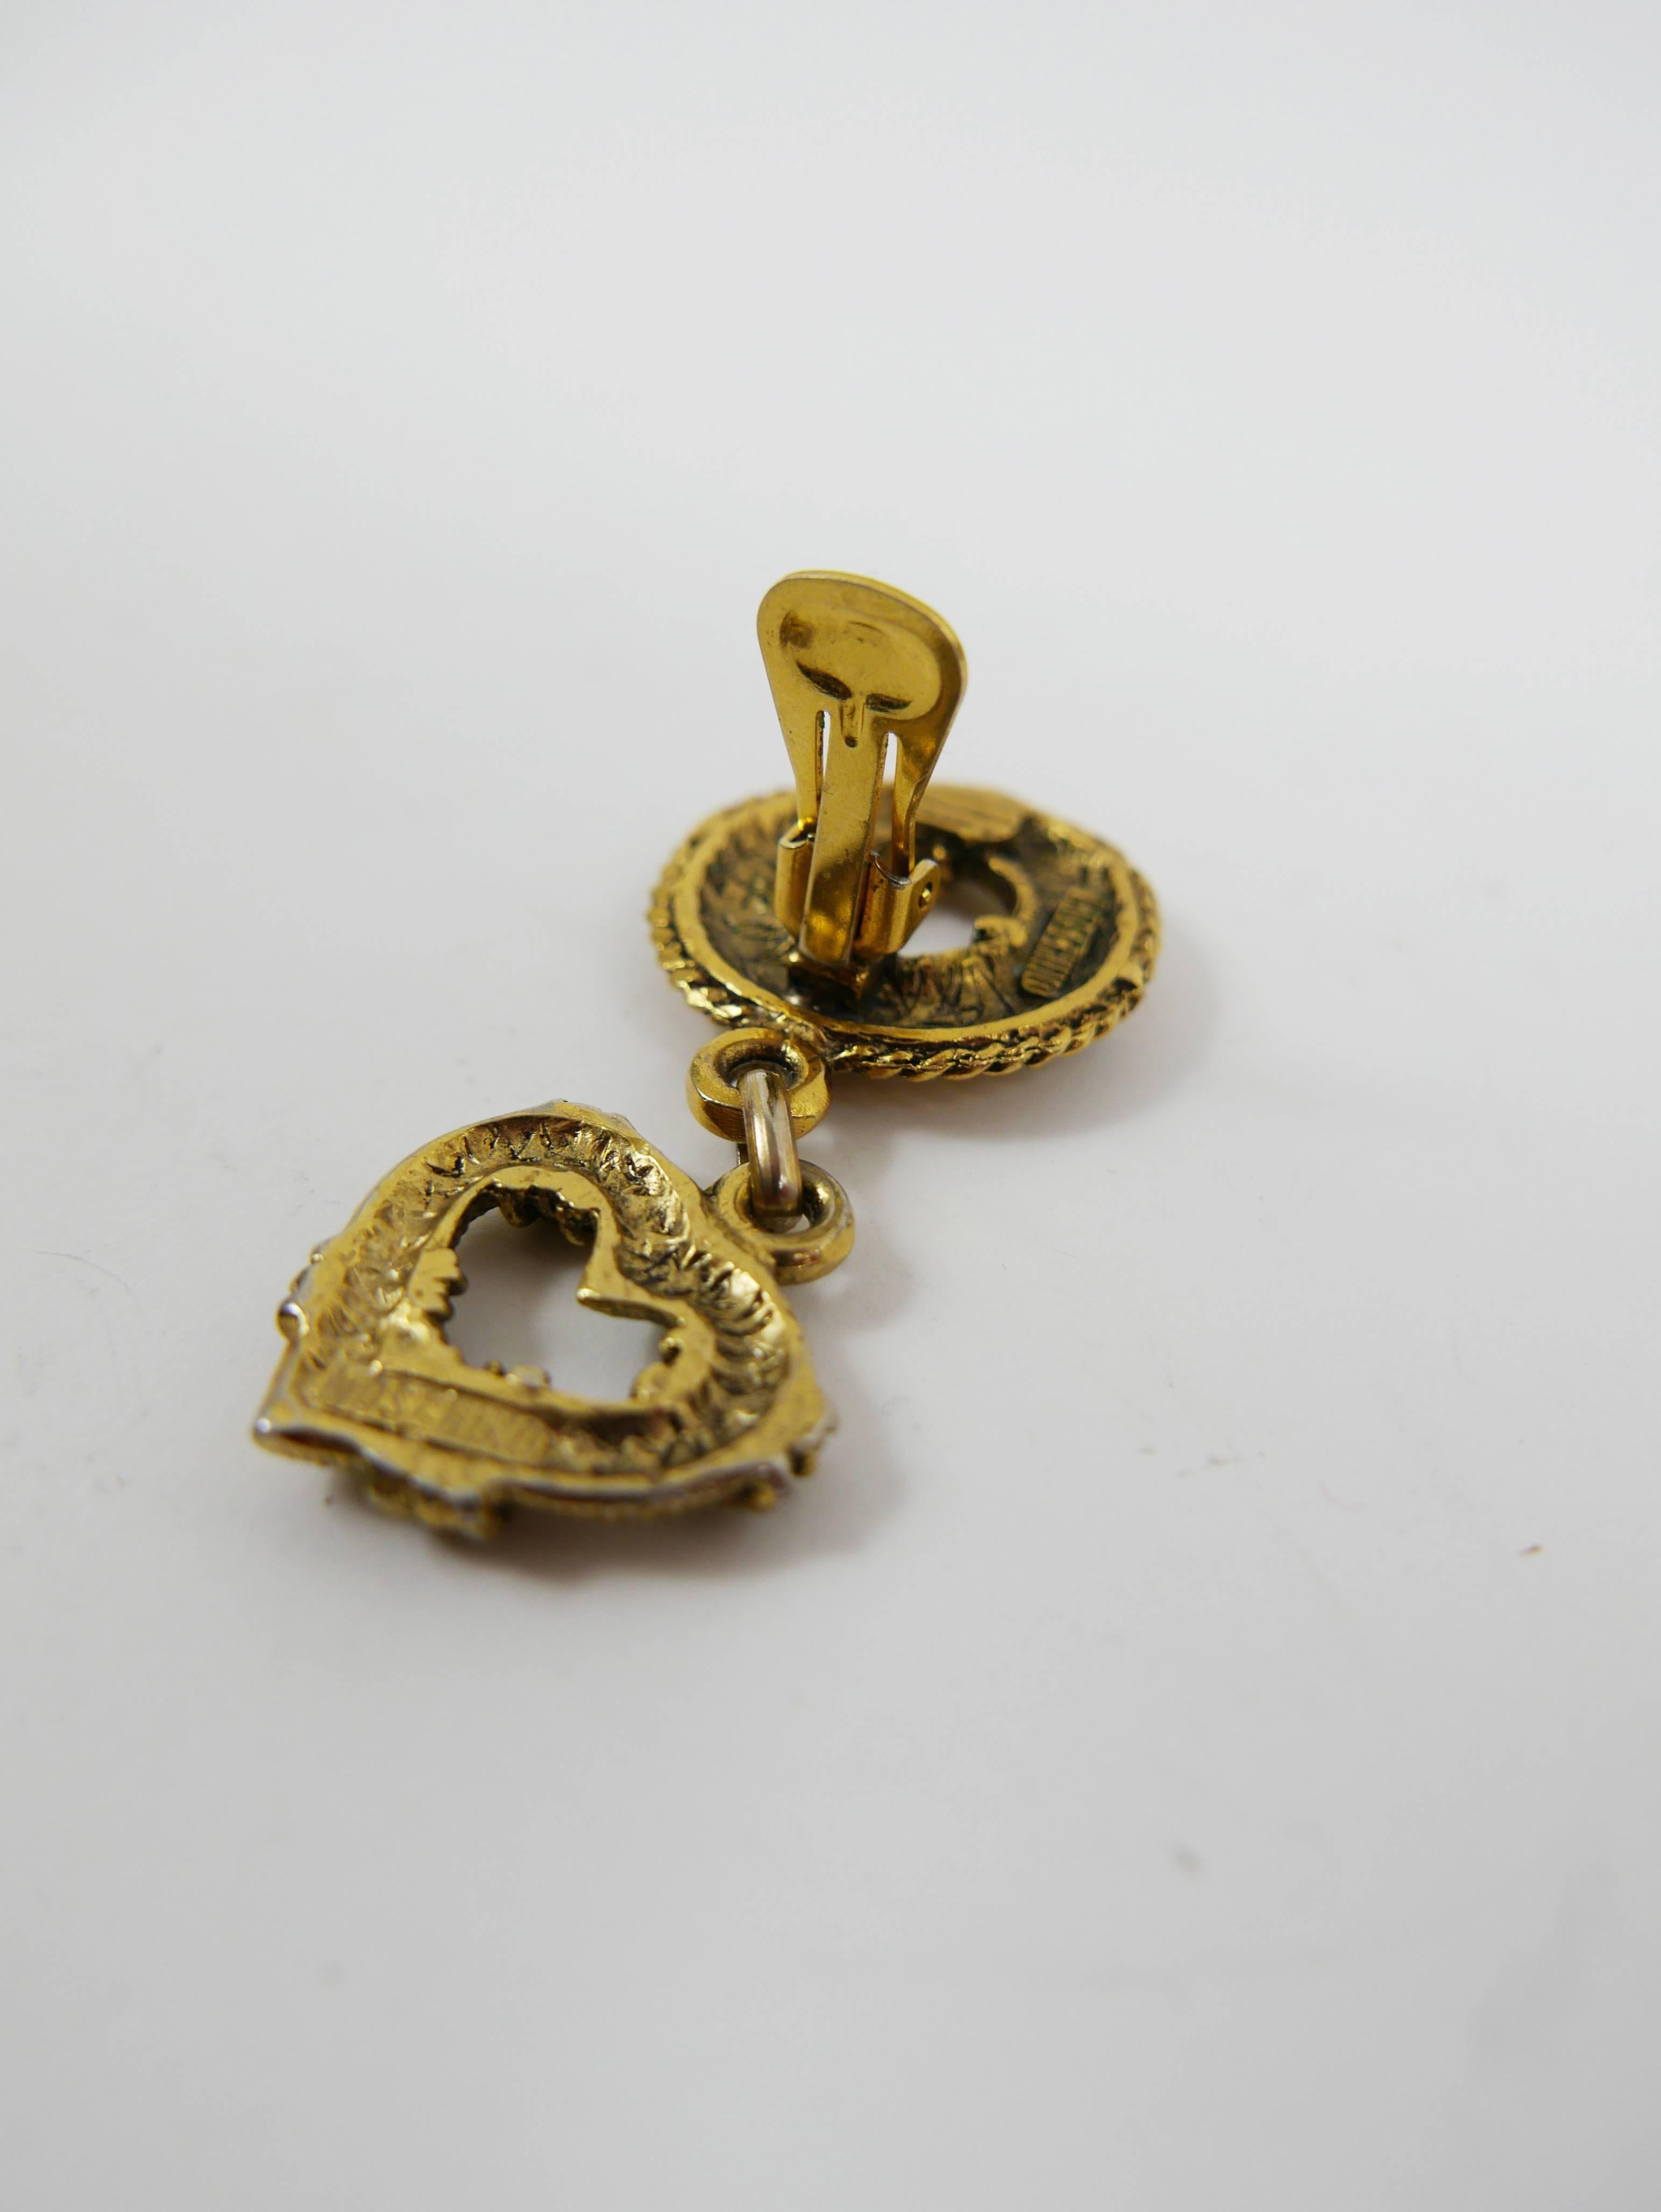 These stunning authentic Moschino clip on earrings has signed pendants in golden metal.

Mint condition

Measurements:
Lenght 2,50 inch
Max width 1 inch
